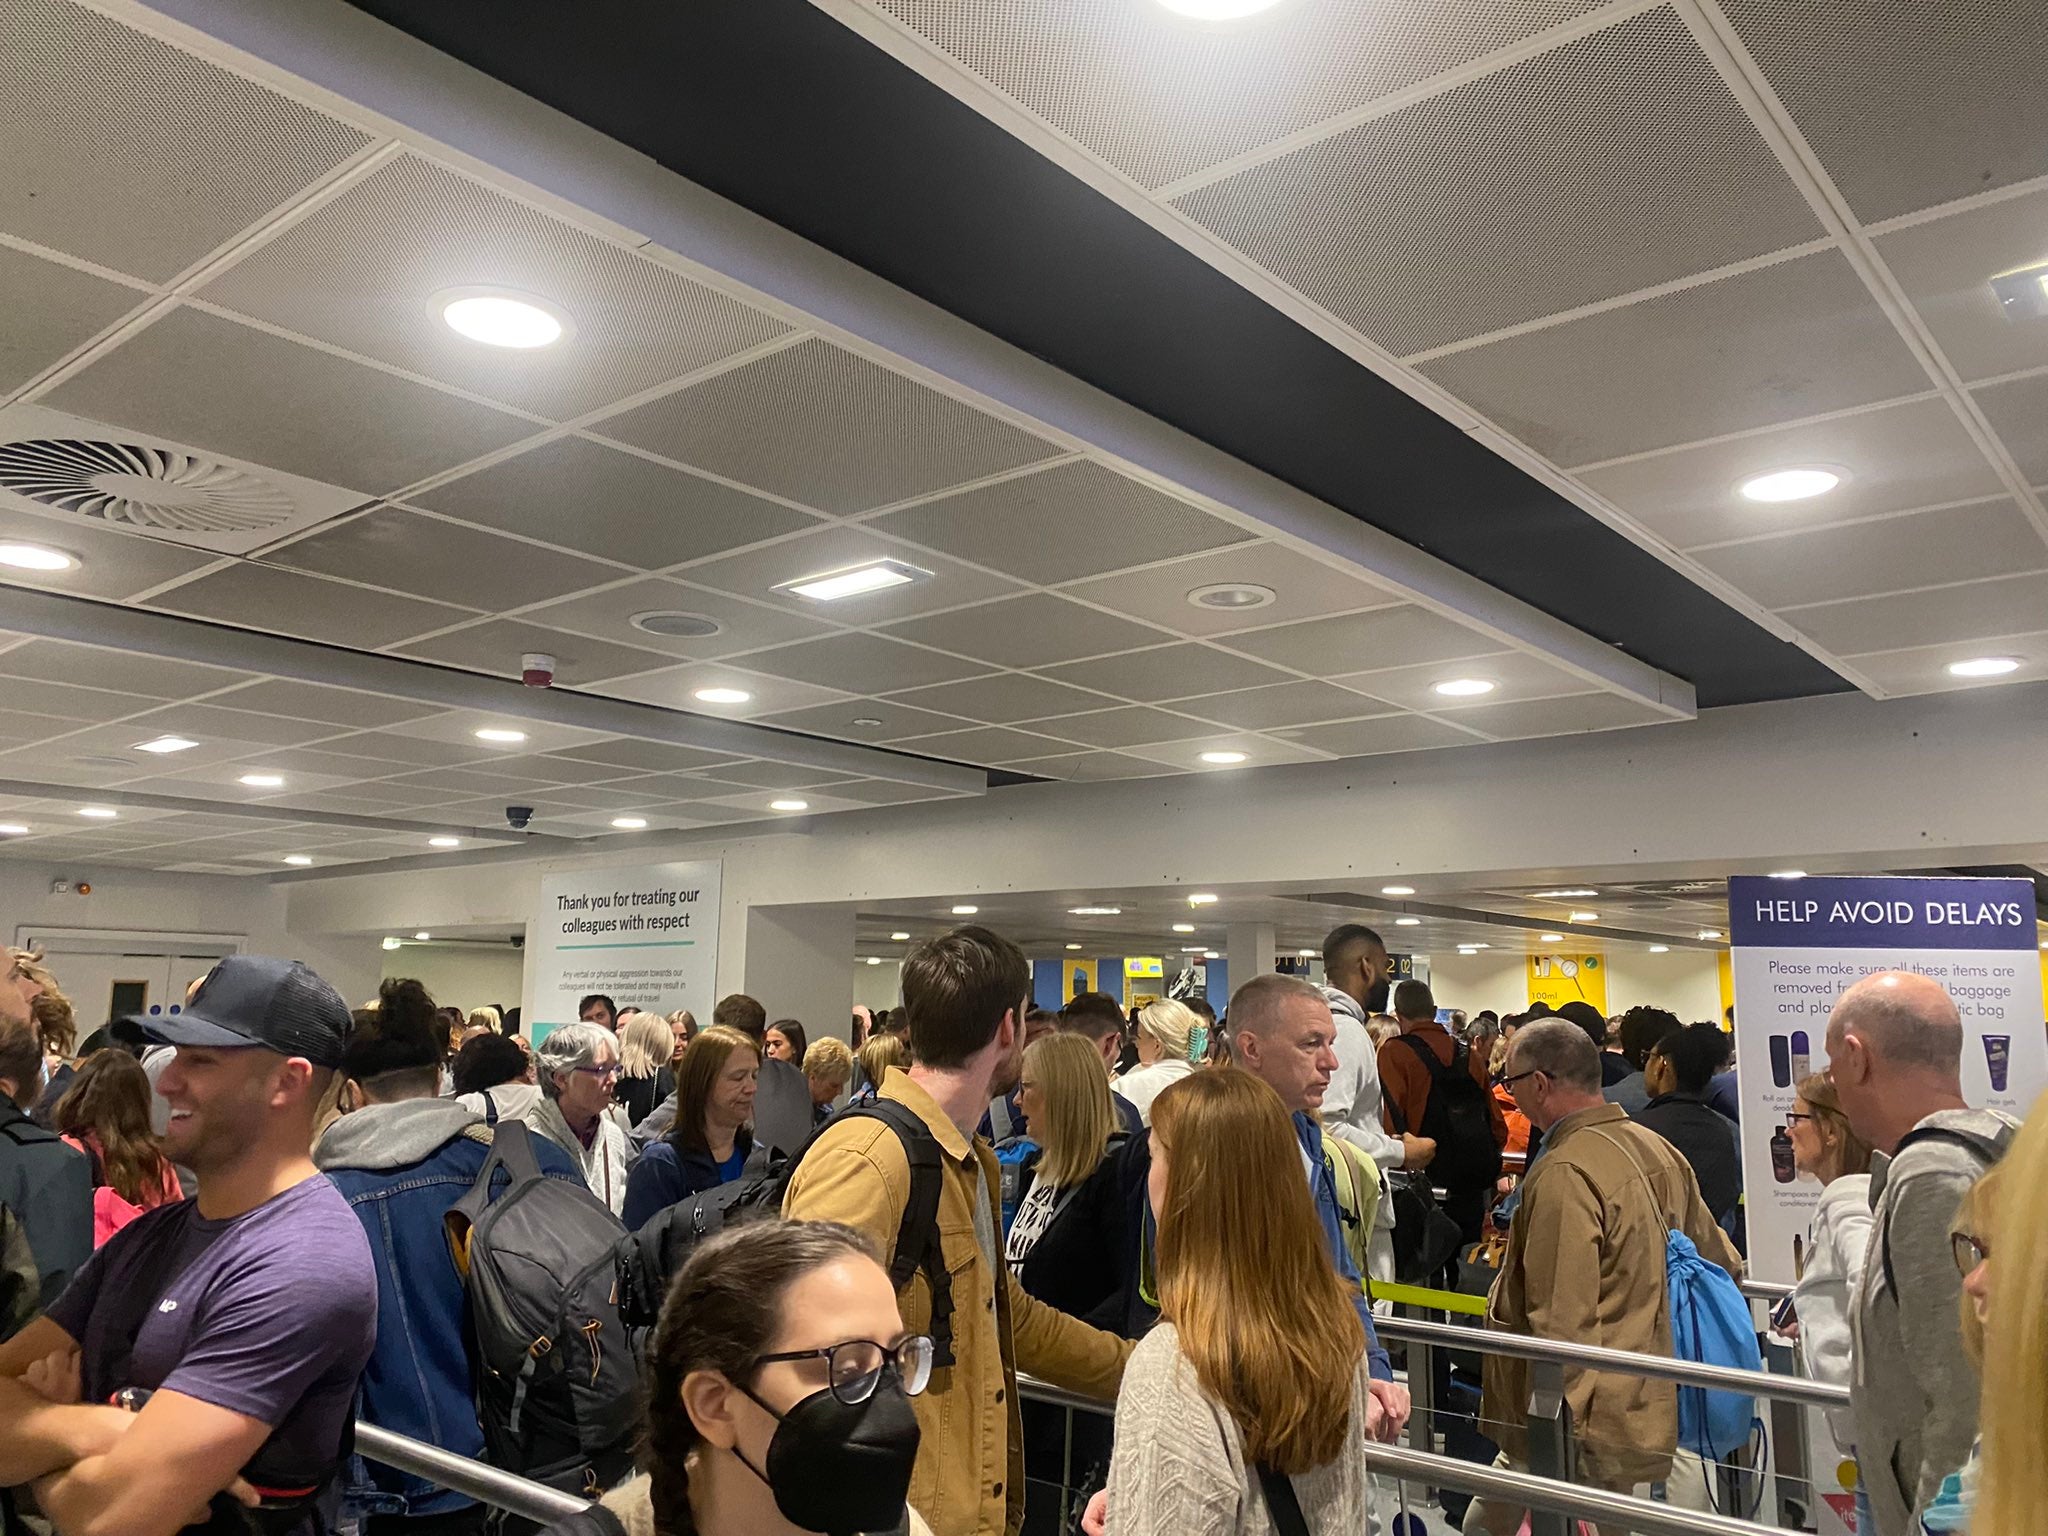 Holly’s experience in Manchester’s security queue